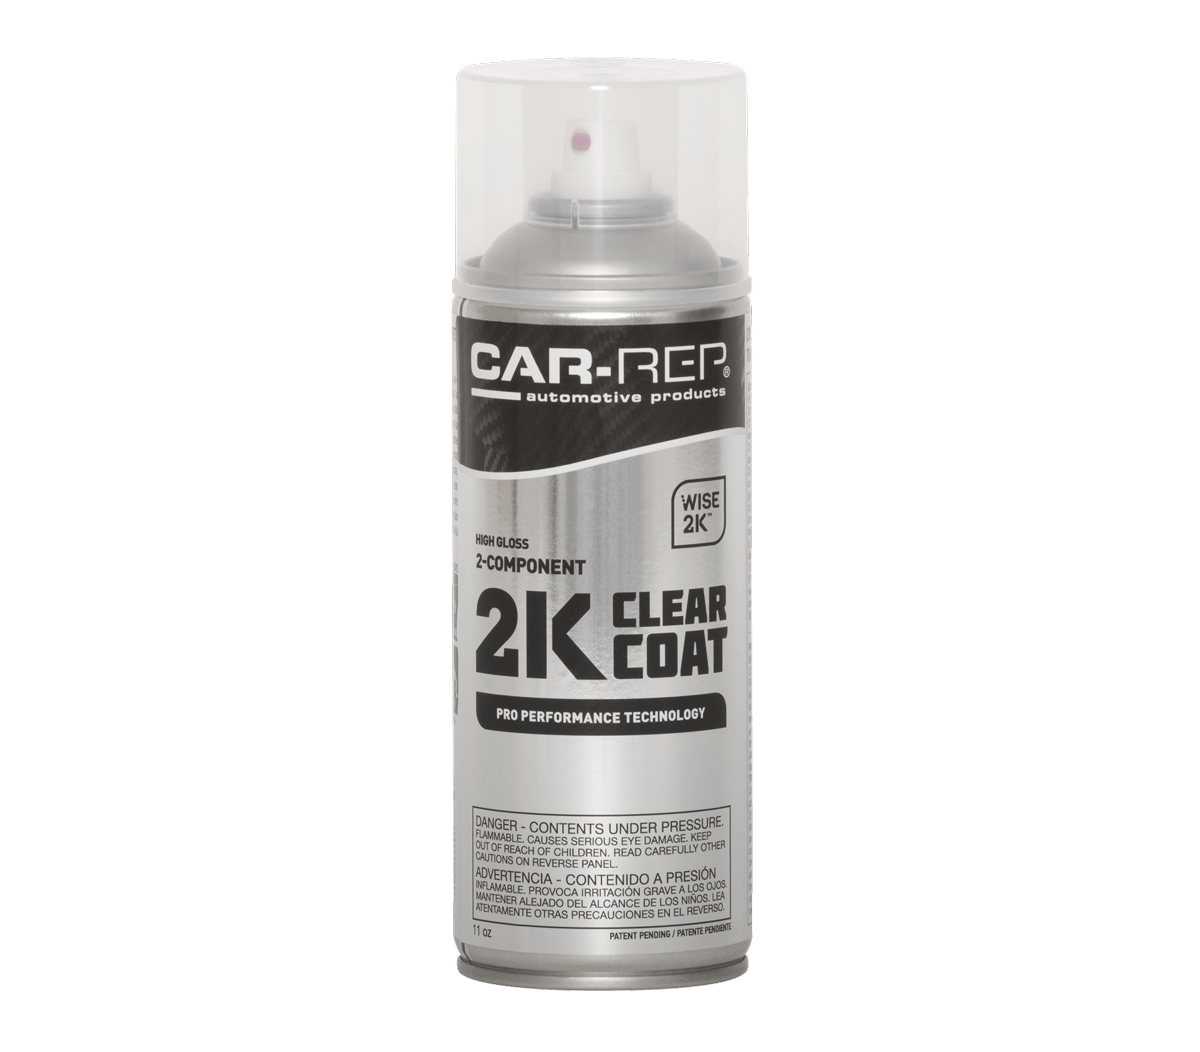 Foresee fredelig Kompatibel med Car-Rep 2K Polyurethane Clear Coat | High Gloss | 400ml Aerosol - Car-Rep  Automotive Products